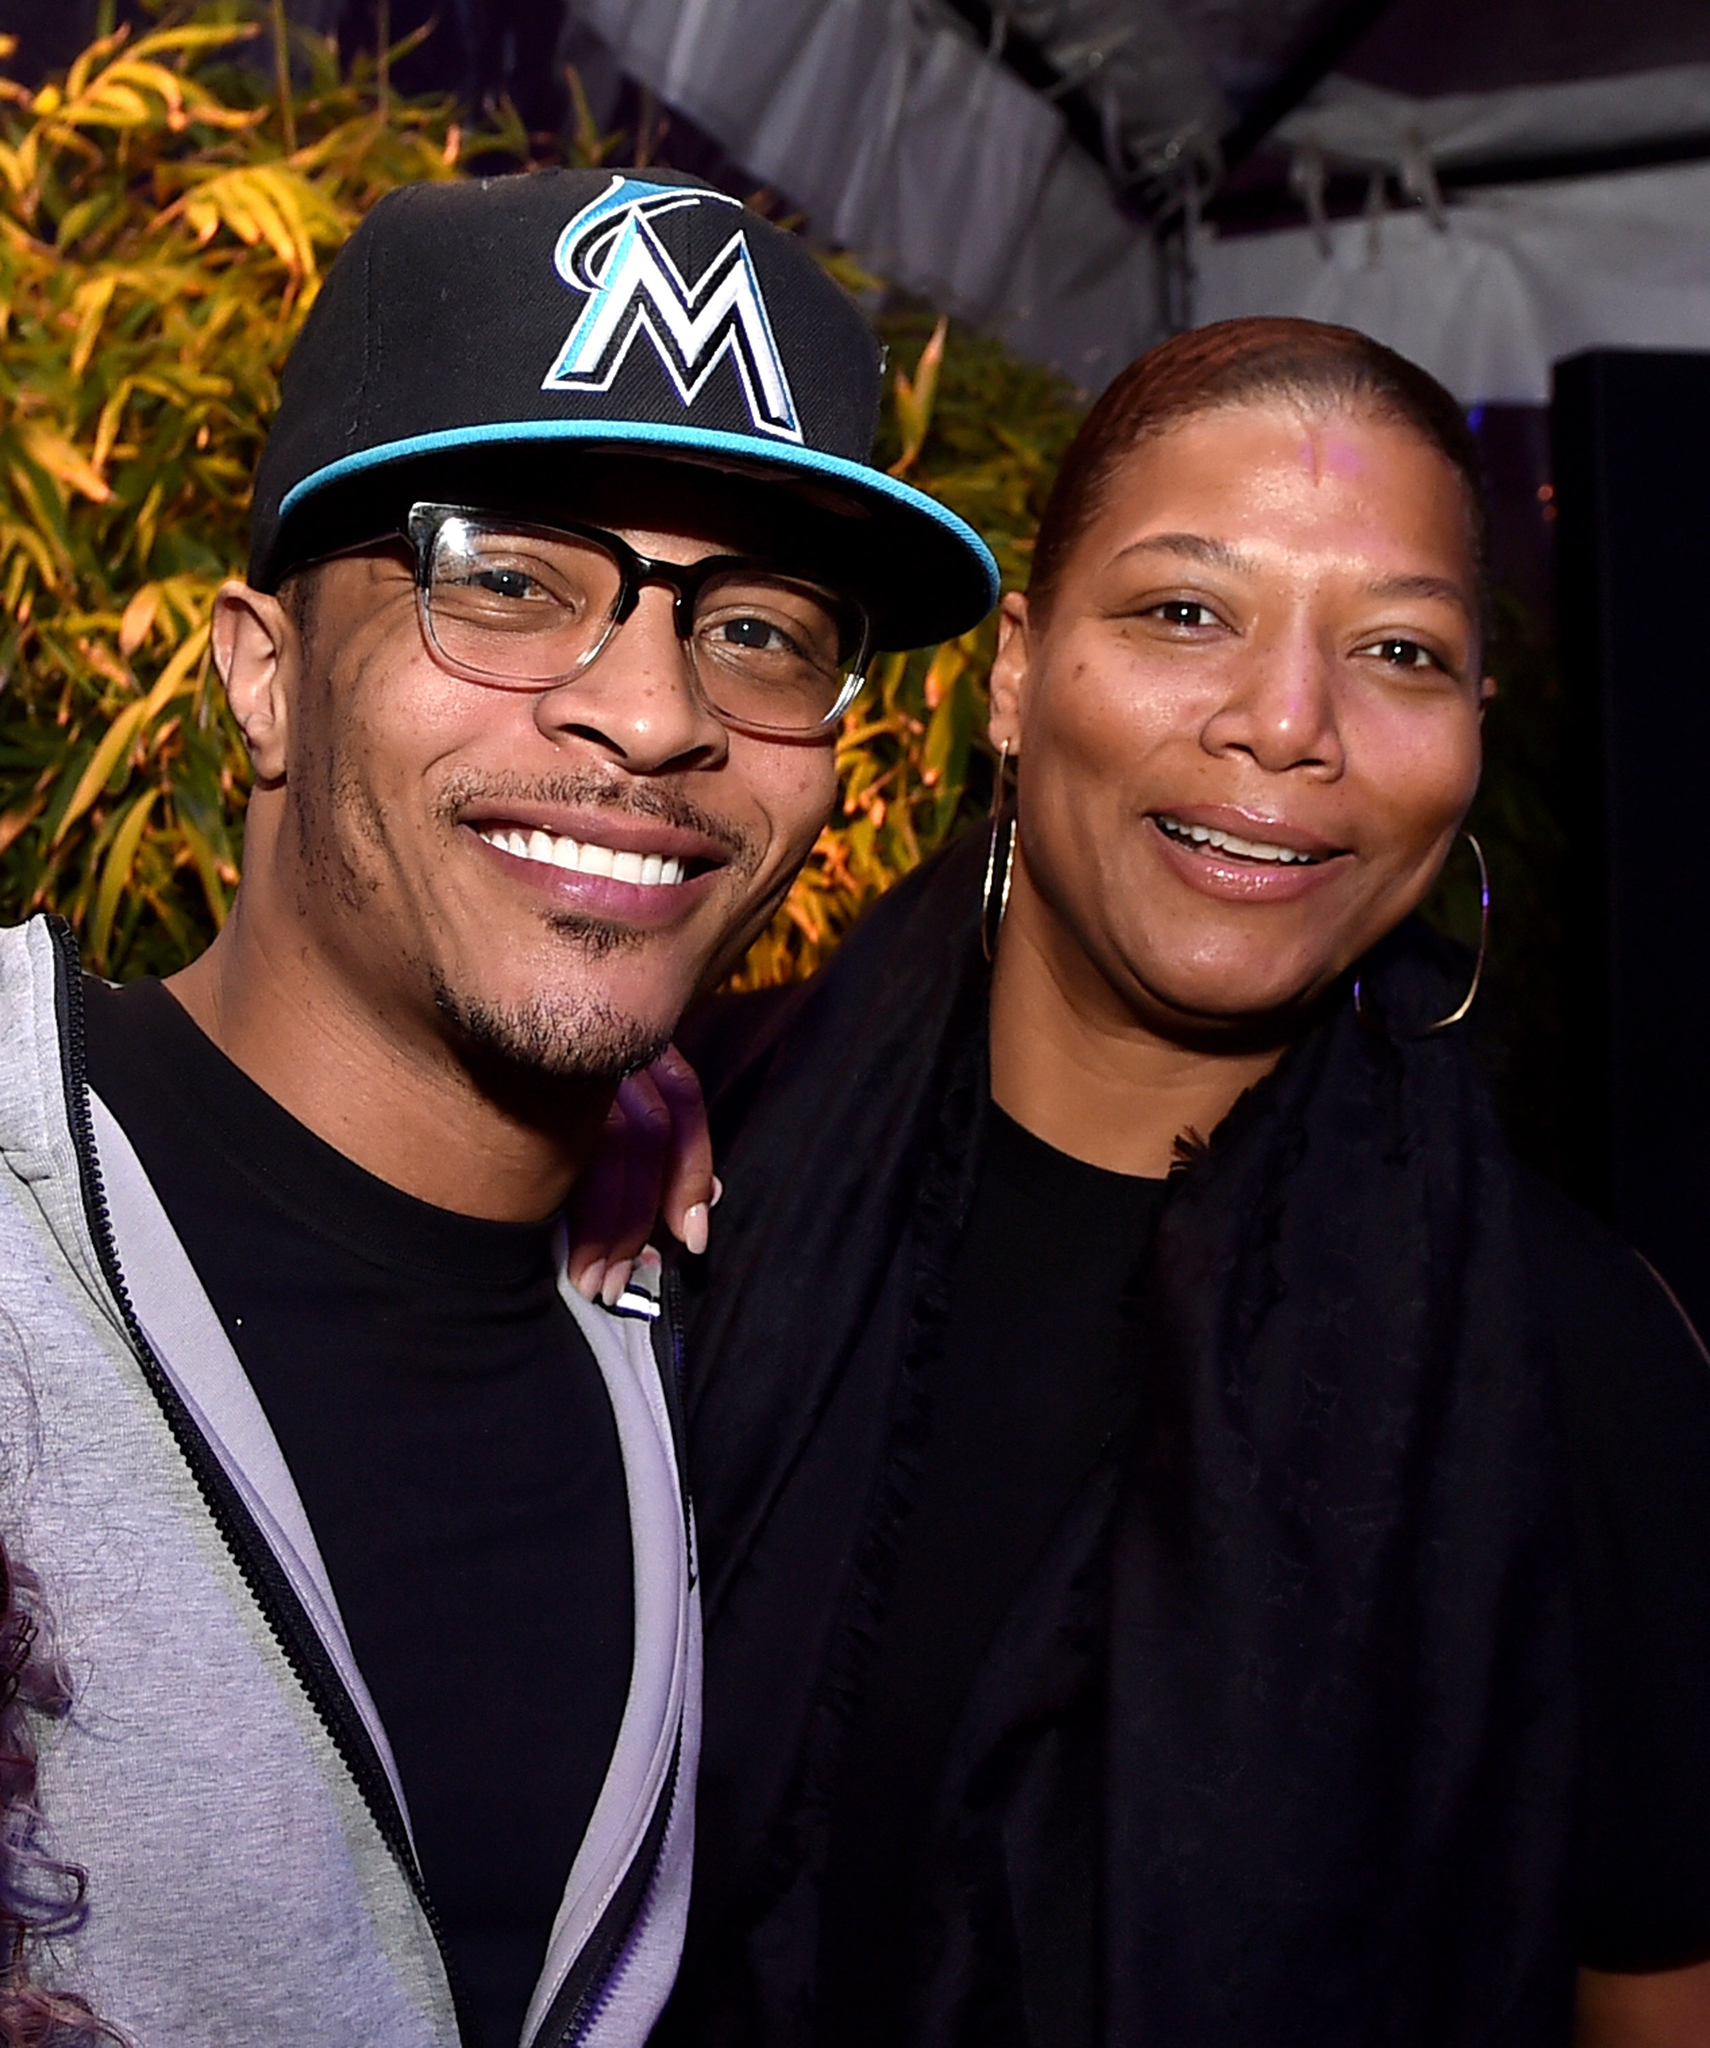 Queen Latifah and T.I. at event of Susikaupk (2015)